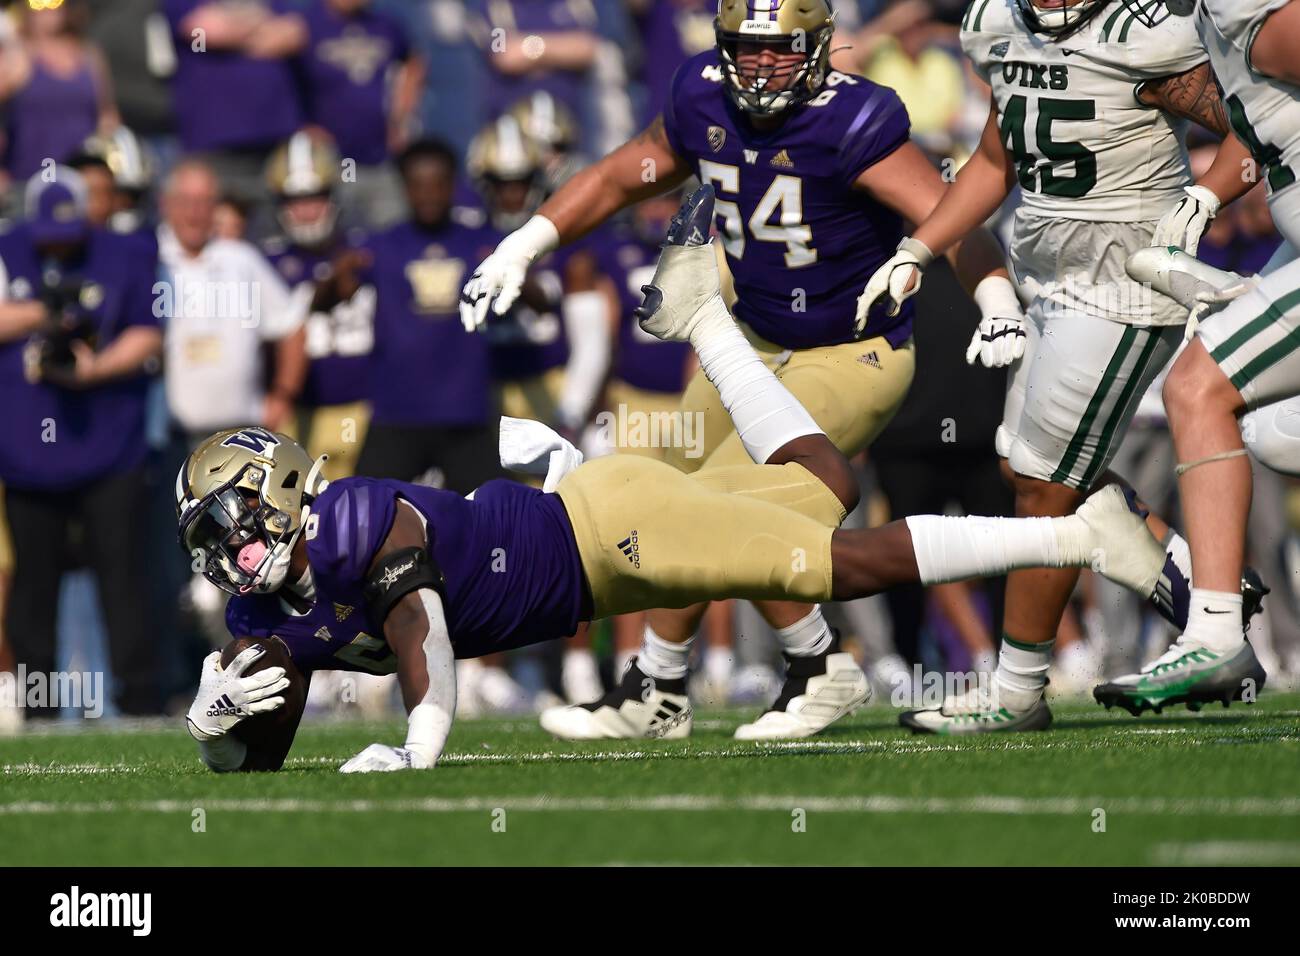 Seattle, WA, USA. 10th Sep, 2022. Washington Huskies running back Richard Newton dives for the end zone during the NCAA Football Game between the Washington Huskies and Portland State Vikings at Husky Stadium in Seattle, WA. Steve Faber/CSM/Alamy Live News Credit: Cal Sport Media/Alamy Live News Stock Photo